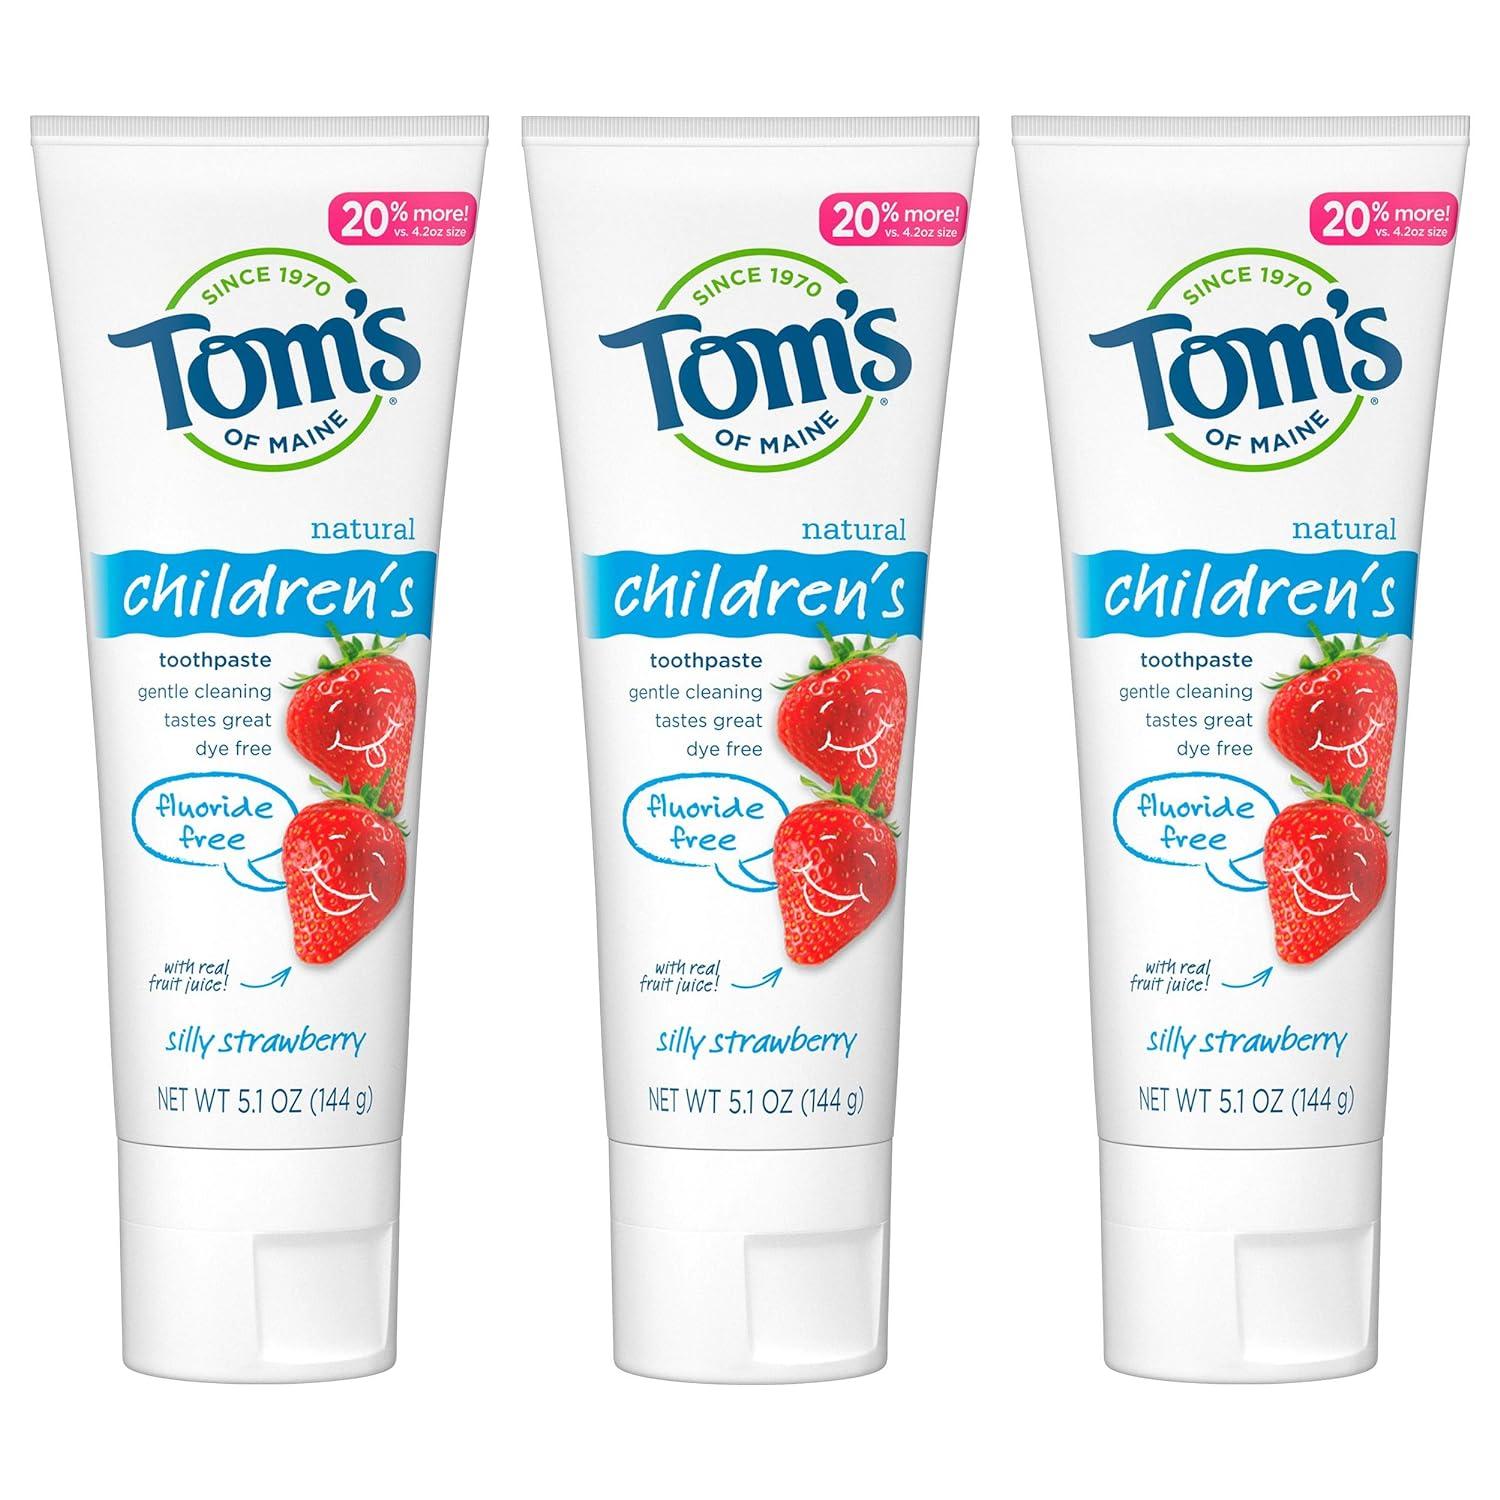 toms of maine fluoride free childrens toothpaste dye free  tom's of maine b082vk8tq1